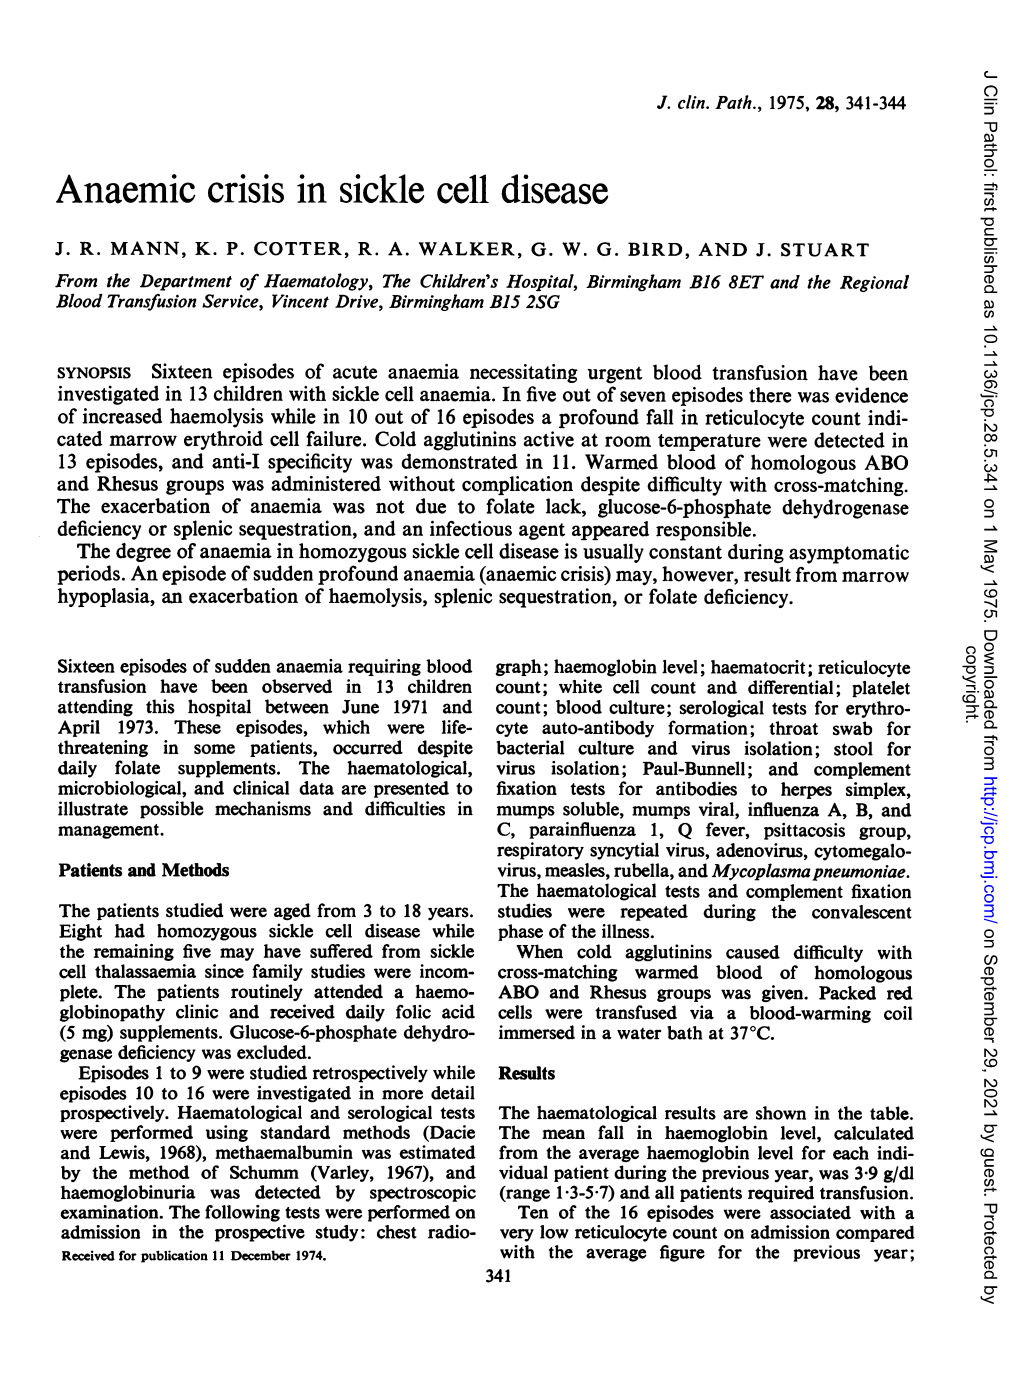 Anaemic Crisis in Sickle Cell Disease